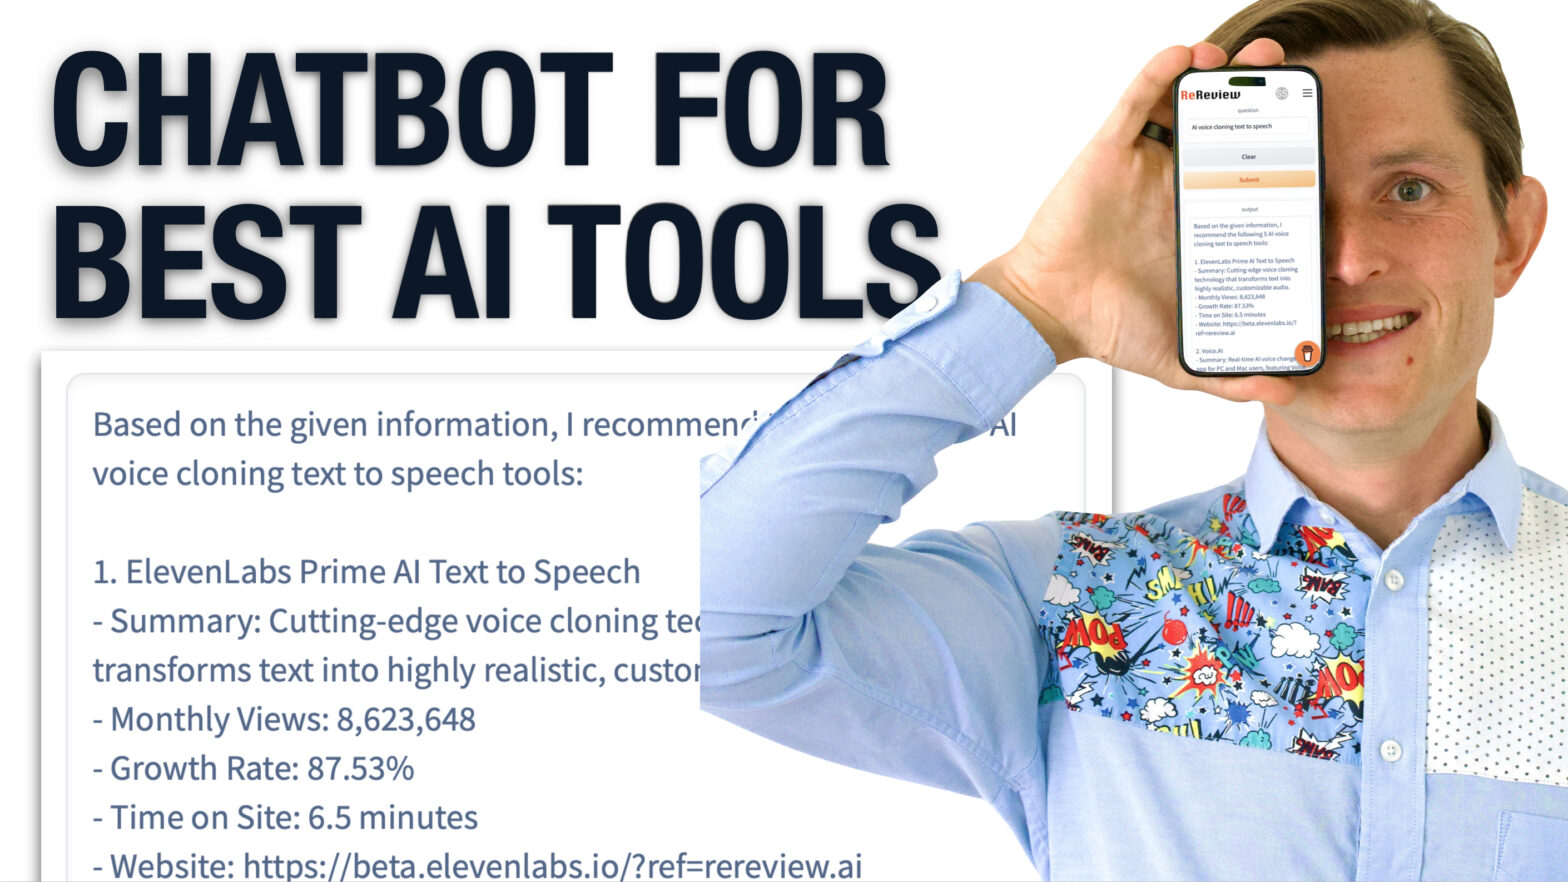 Chatbot for fining the best AI tools – Building ReReview AI vol 2